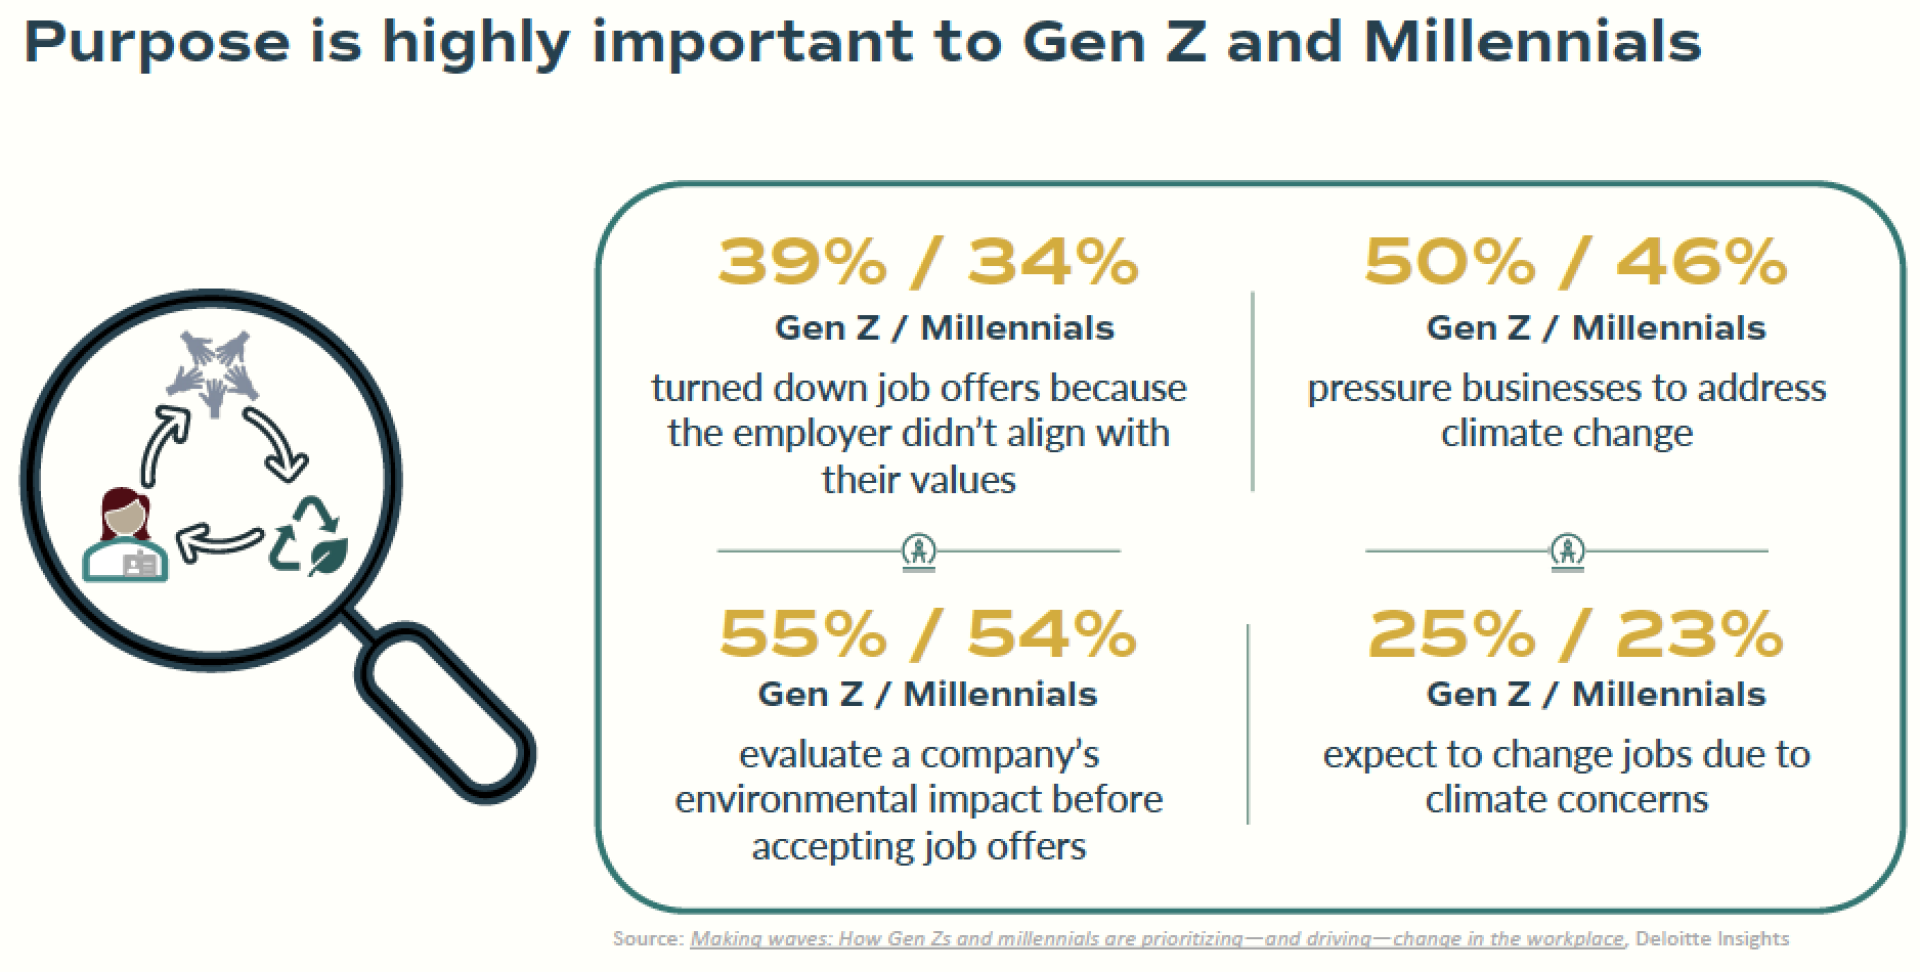 Statistics show Gen Z and Millennials expect business to take action on the climate